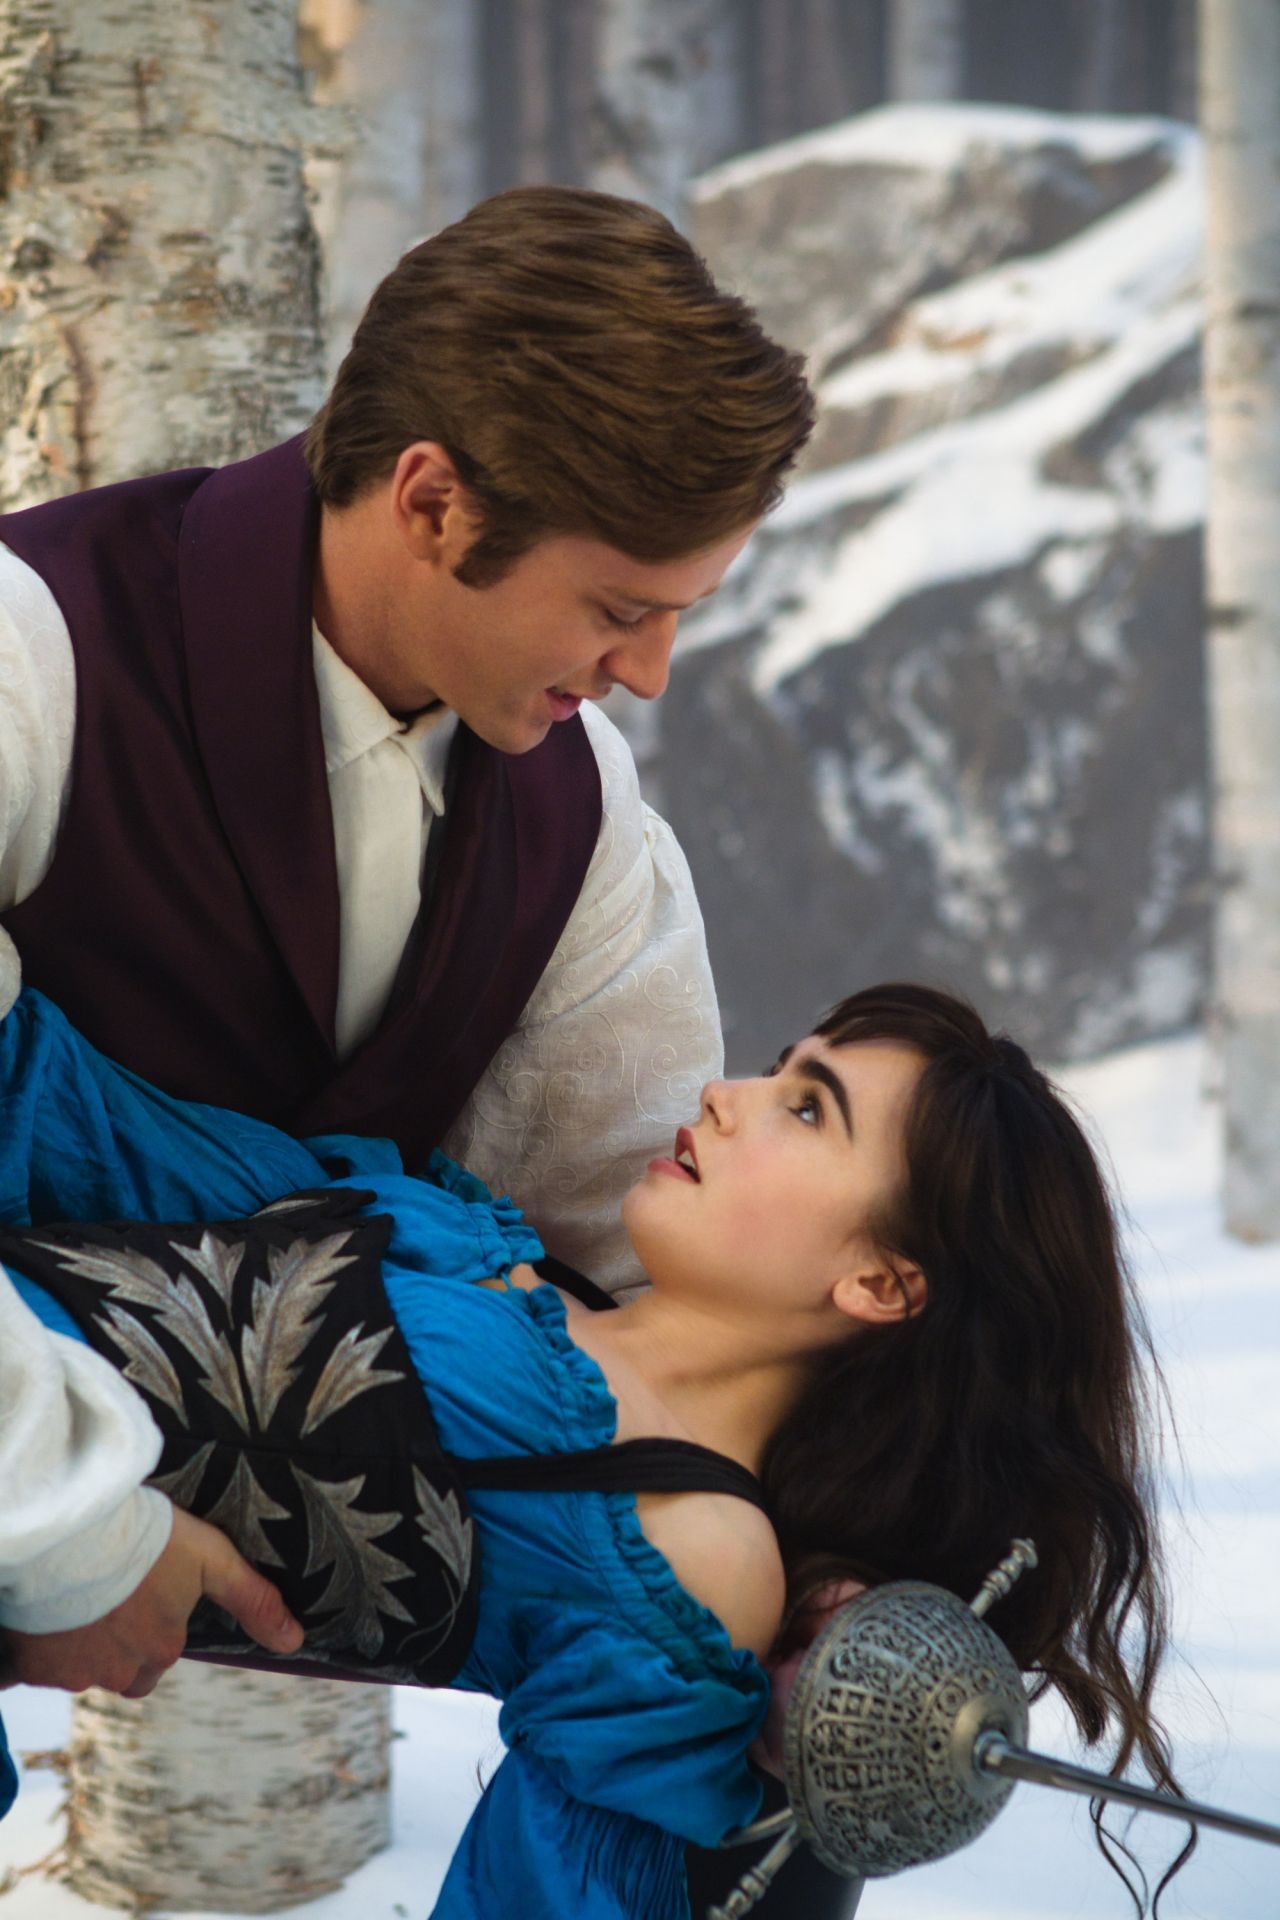 Armie Hammer stars as Prince Andrew Alcott and Lily Collins stars as Snow White in Relativity Media's Mirror Mirror (2012)